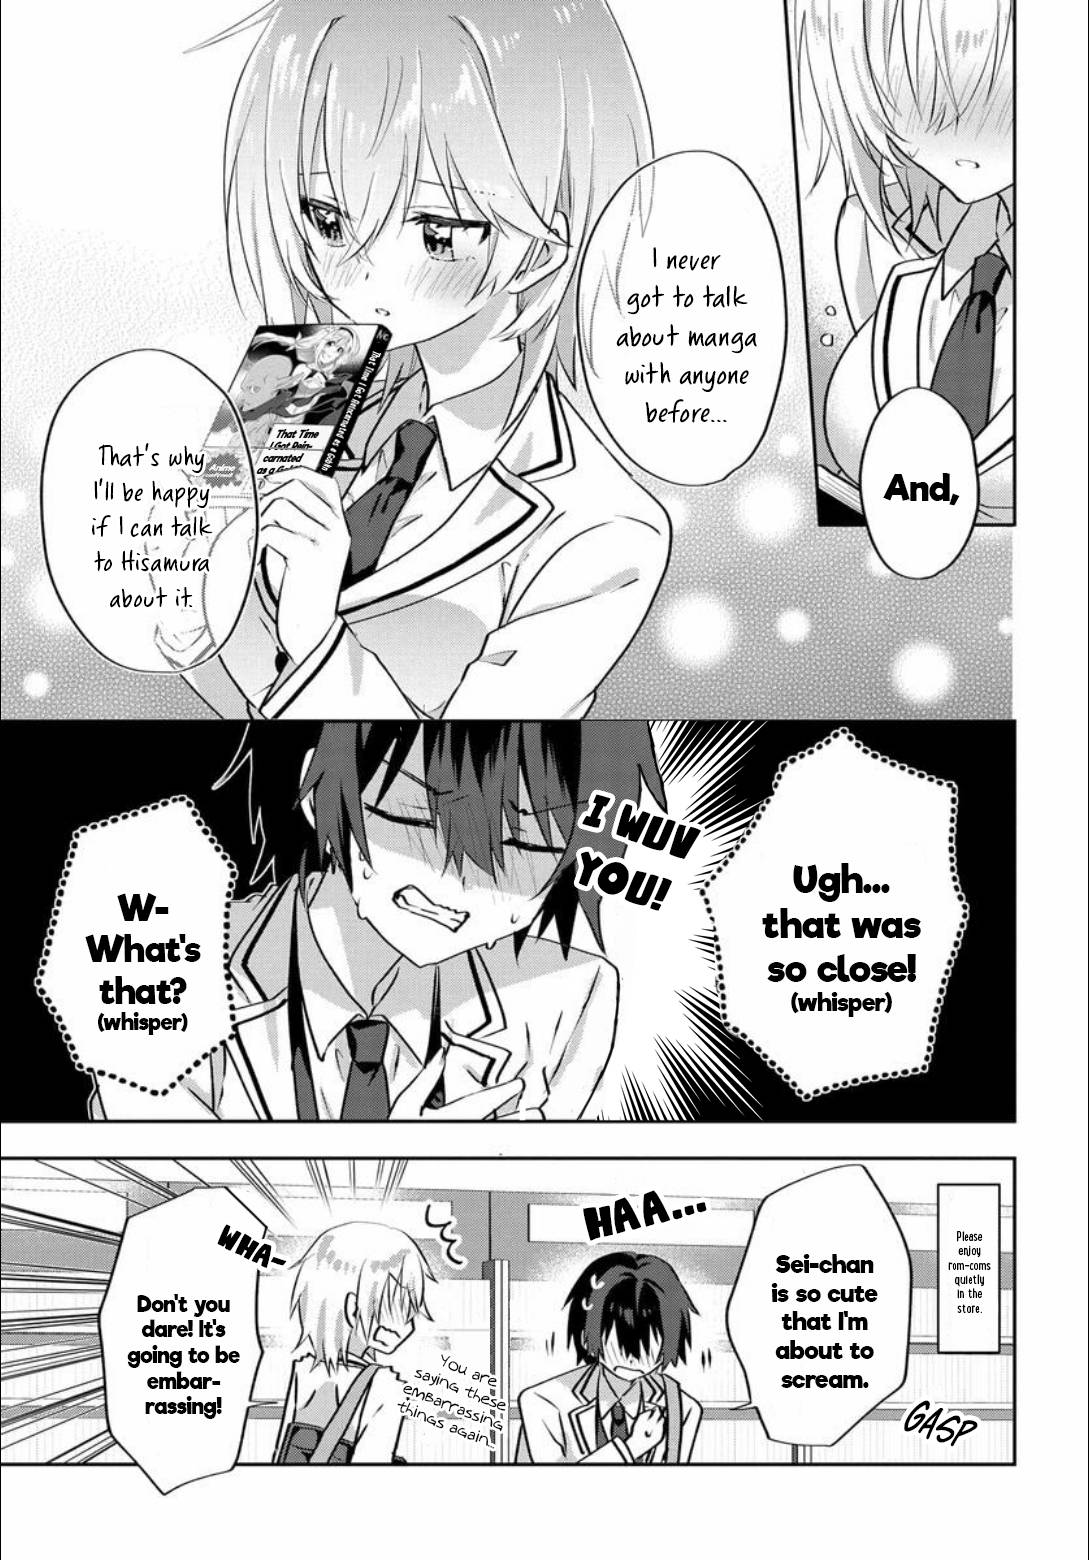 Since I’ve Entered the World of Romantic Comedy Manga, I’ll Do My Best to Make the Losing Heroine Happy. - chapter 5.1 - #5